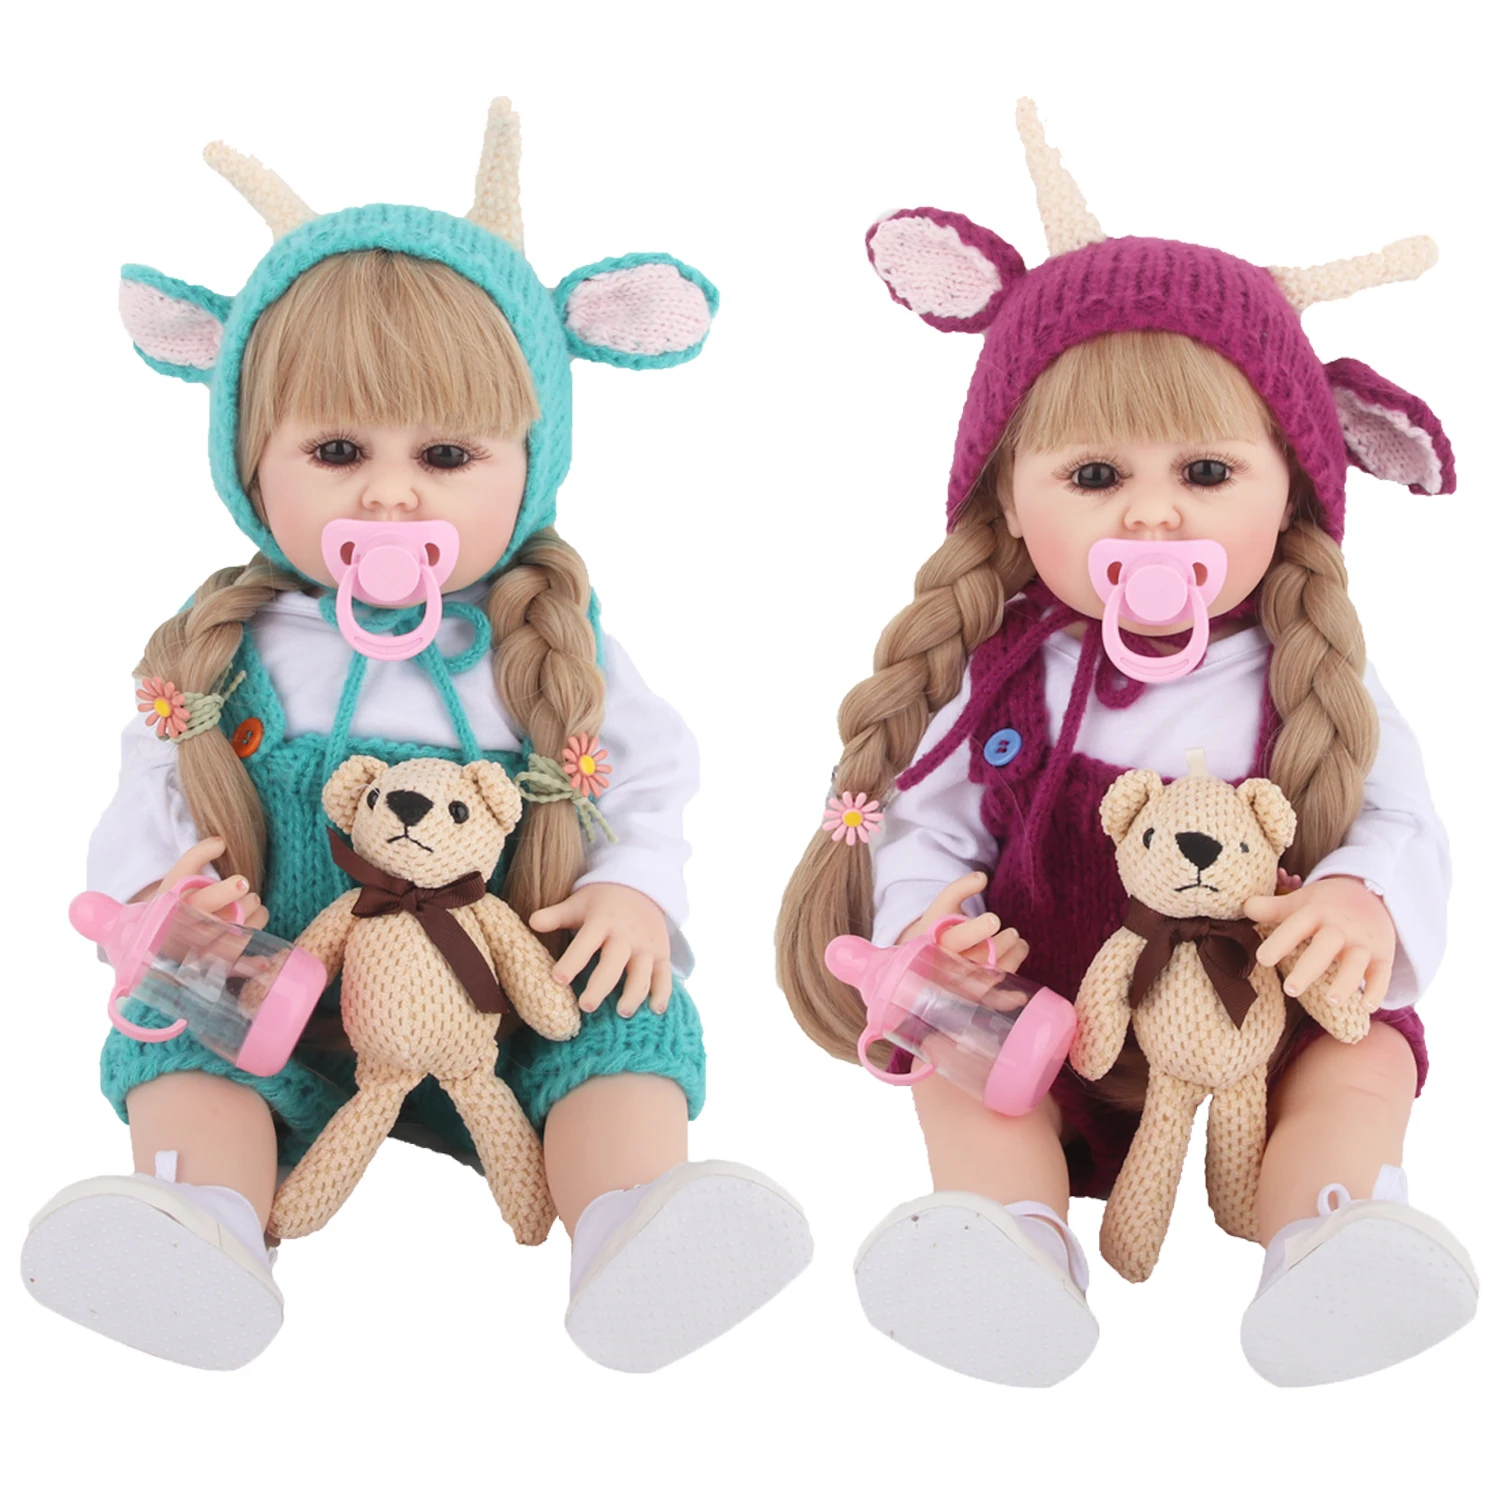 

Cute 22 Inch 55cm Reborn Dolls Simulation Full Body Silicone Princess Girl Doll Sleeping Accompany Play House Toy Gift For Kids